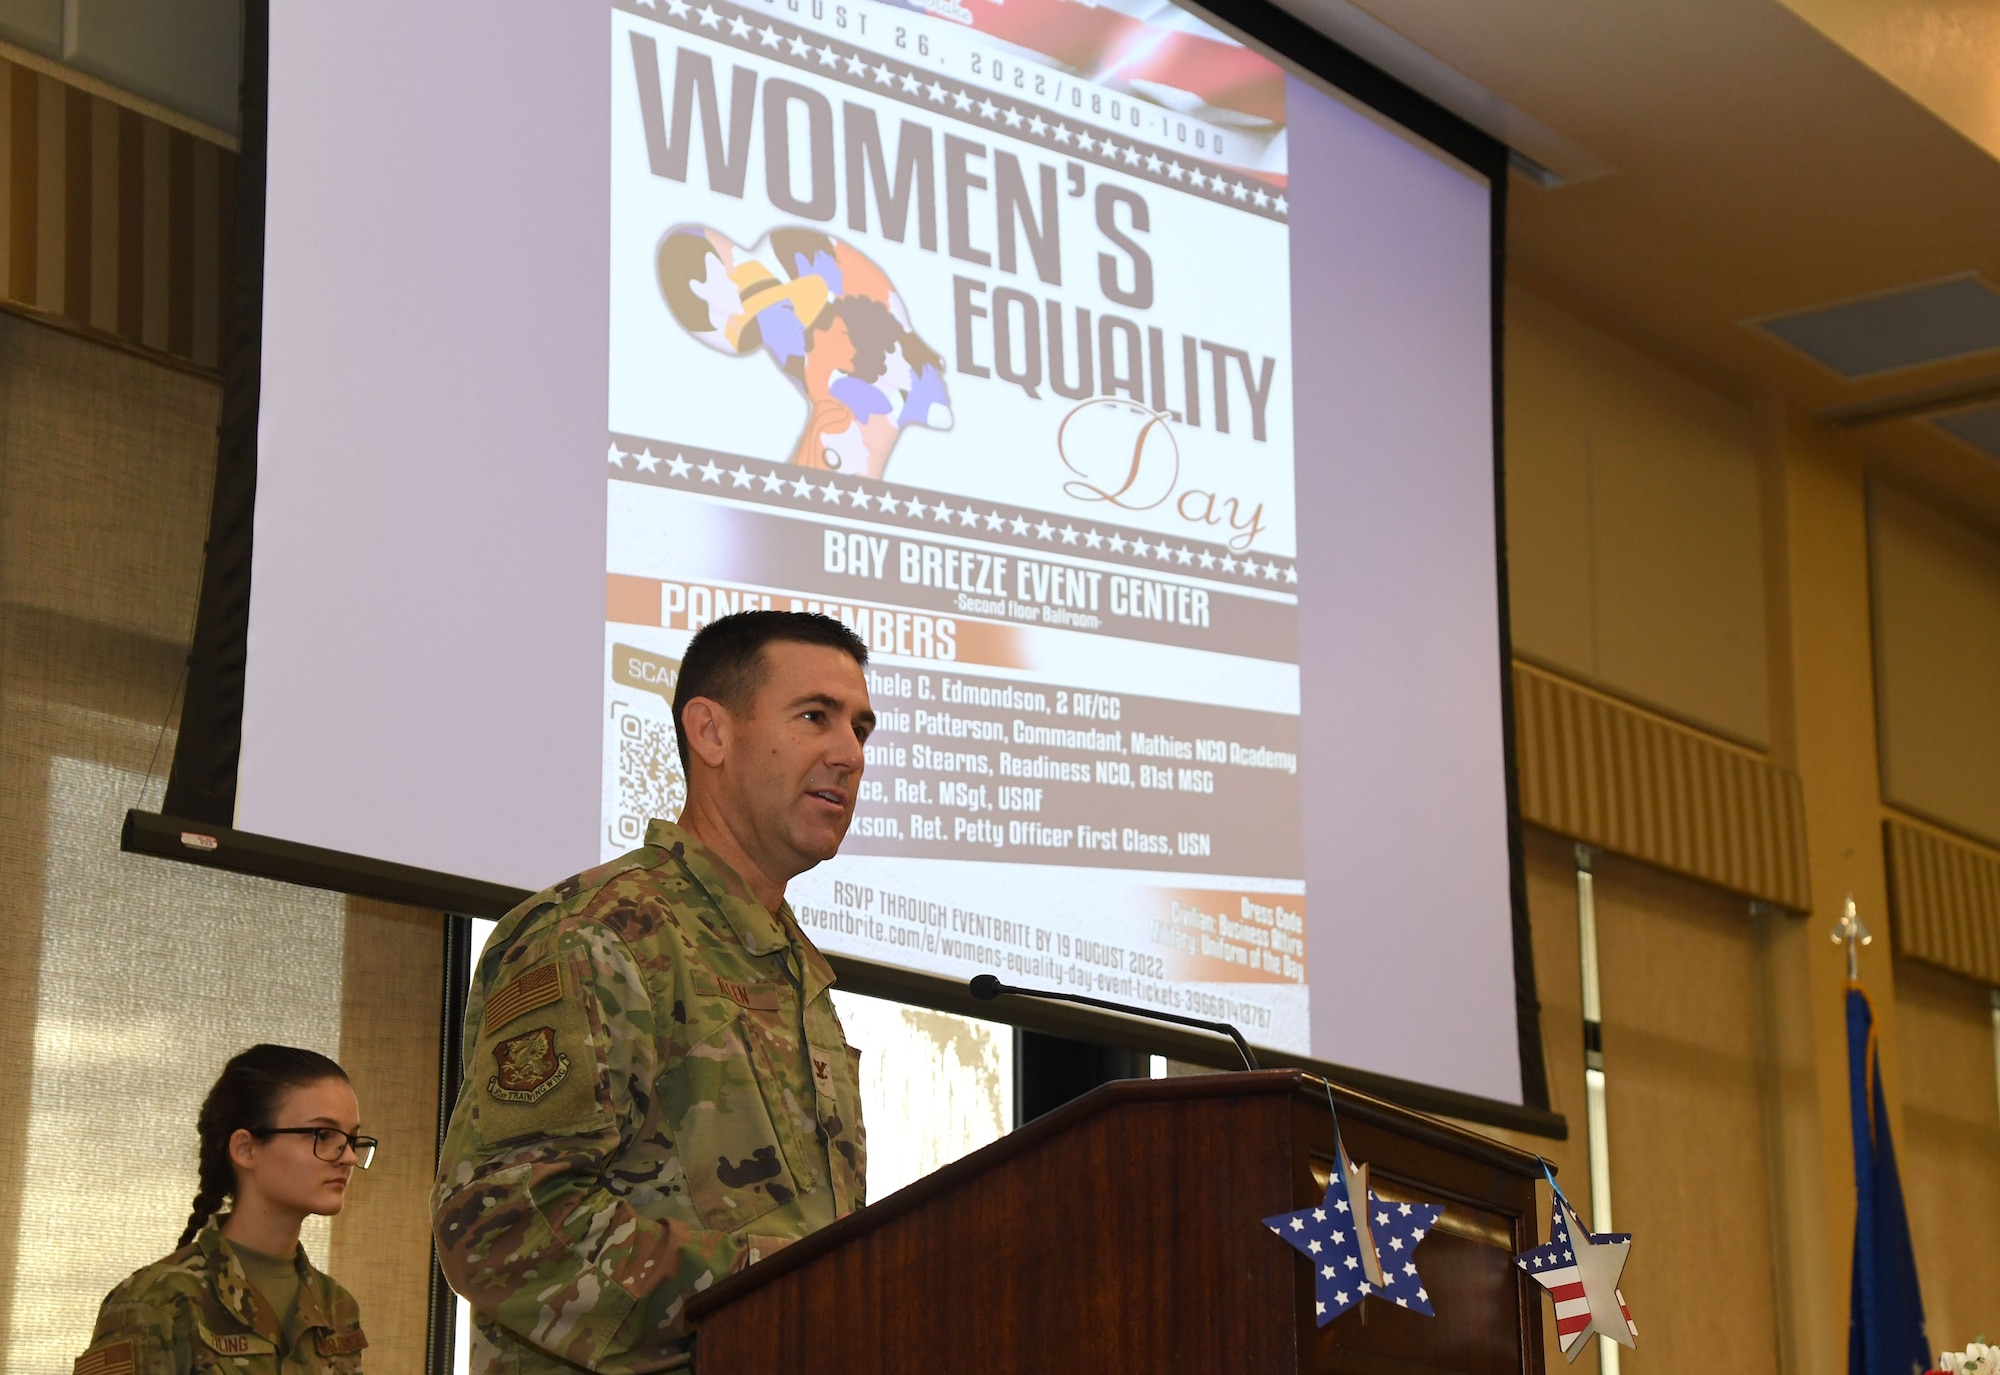 U.S. Air Force Col. Jason Allen, 81st Training Wing vice commander, delivers remarks during the Women's Equality Day event inside the Bay Breeze Event Center at Keesler Air Force Base, Mississippi, Aug. 26, 2022. On Women's Equality Day, we honor the movement for universal suffrage that led to the 19th Amendment, celebrate the progress of women over the years, and renew our commitment to advancing gender equity and protecting women's rights. (U.S. Air Force photo by Kemberly Groue)